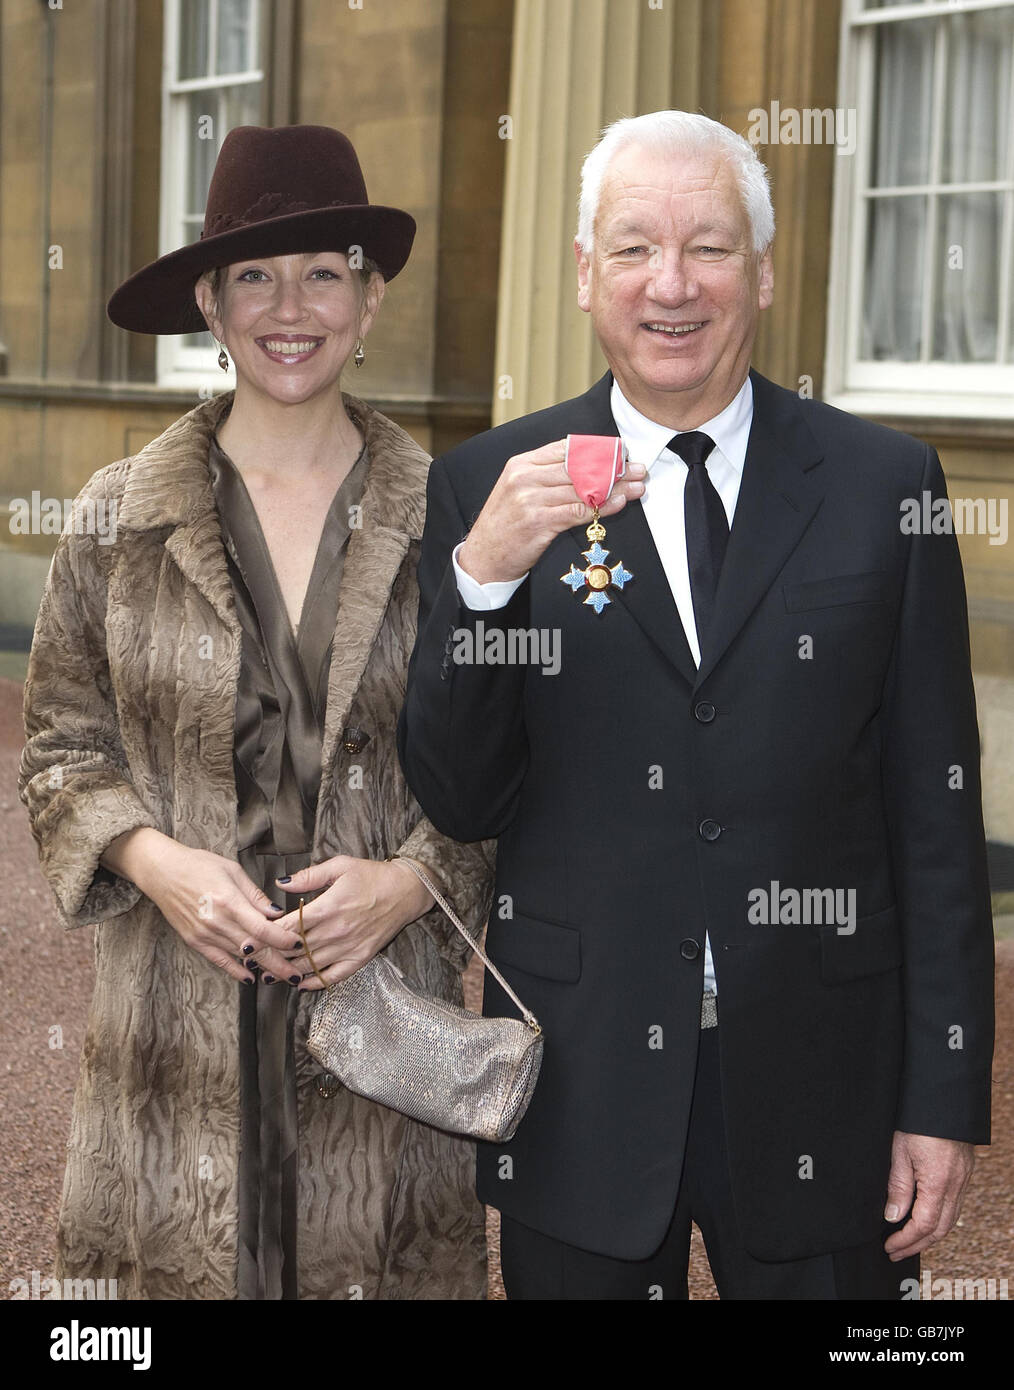 Michael Craig-Martin with his daughter Jessica Craig-Martin outside Buckingham Palace, London, after receiving a CBE for services to Art from Queen Elizabeth II. Stock Photo